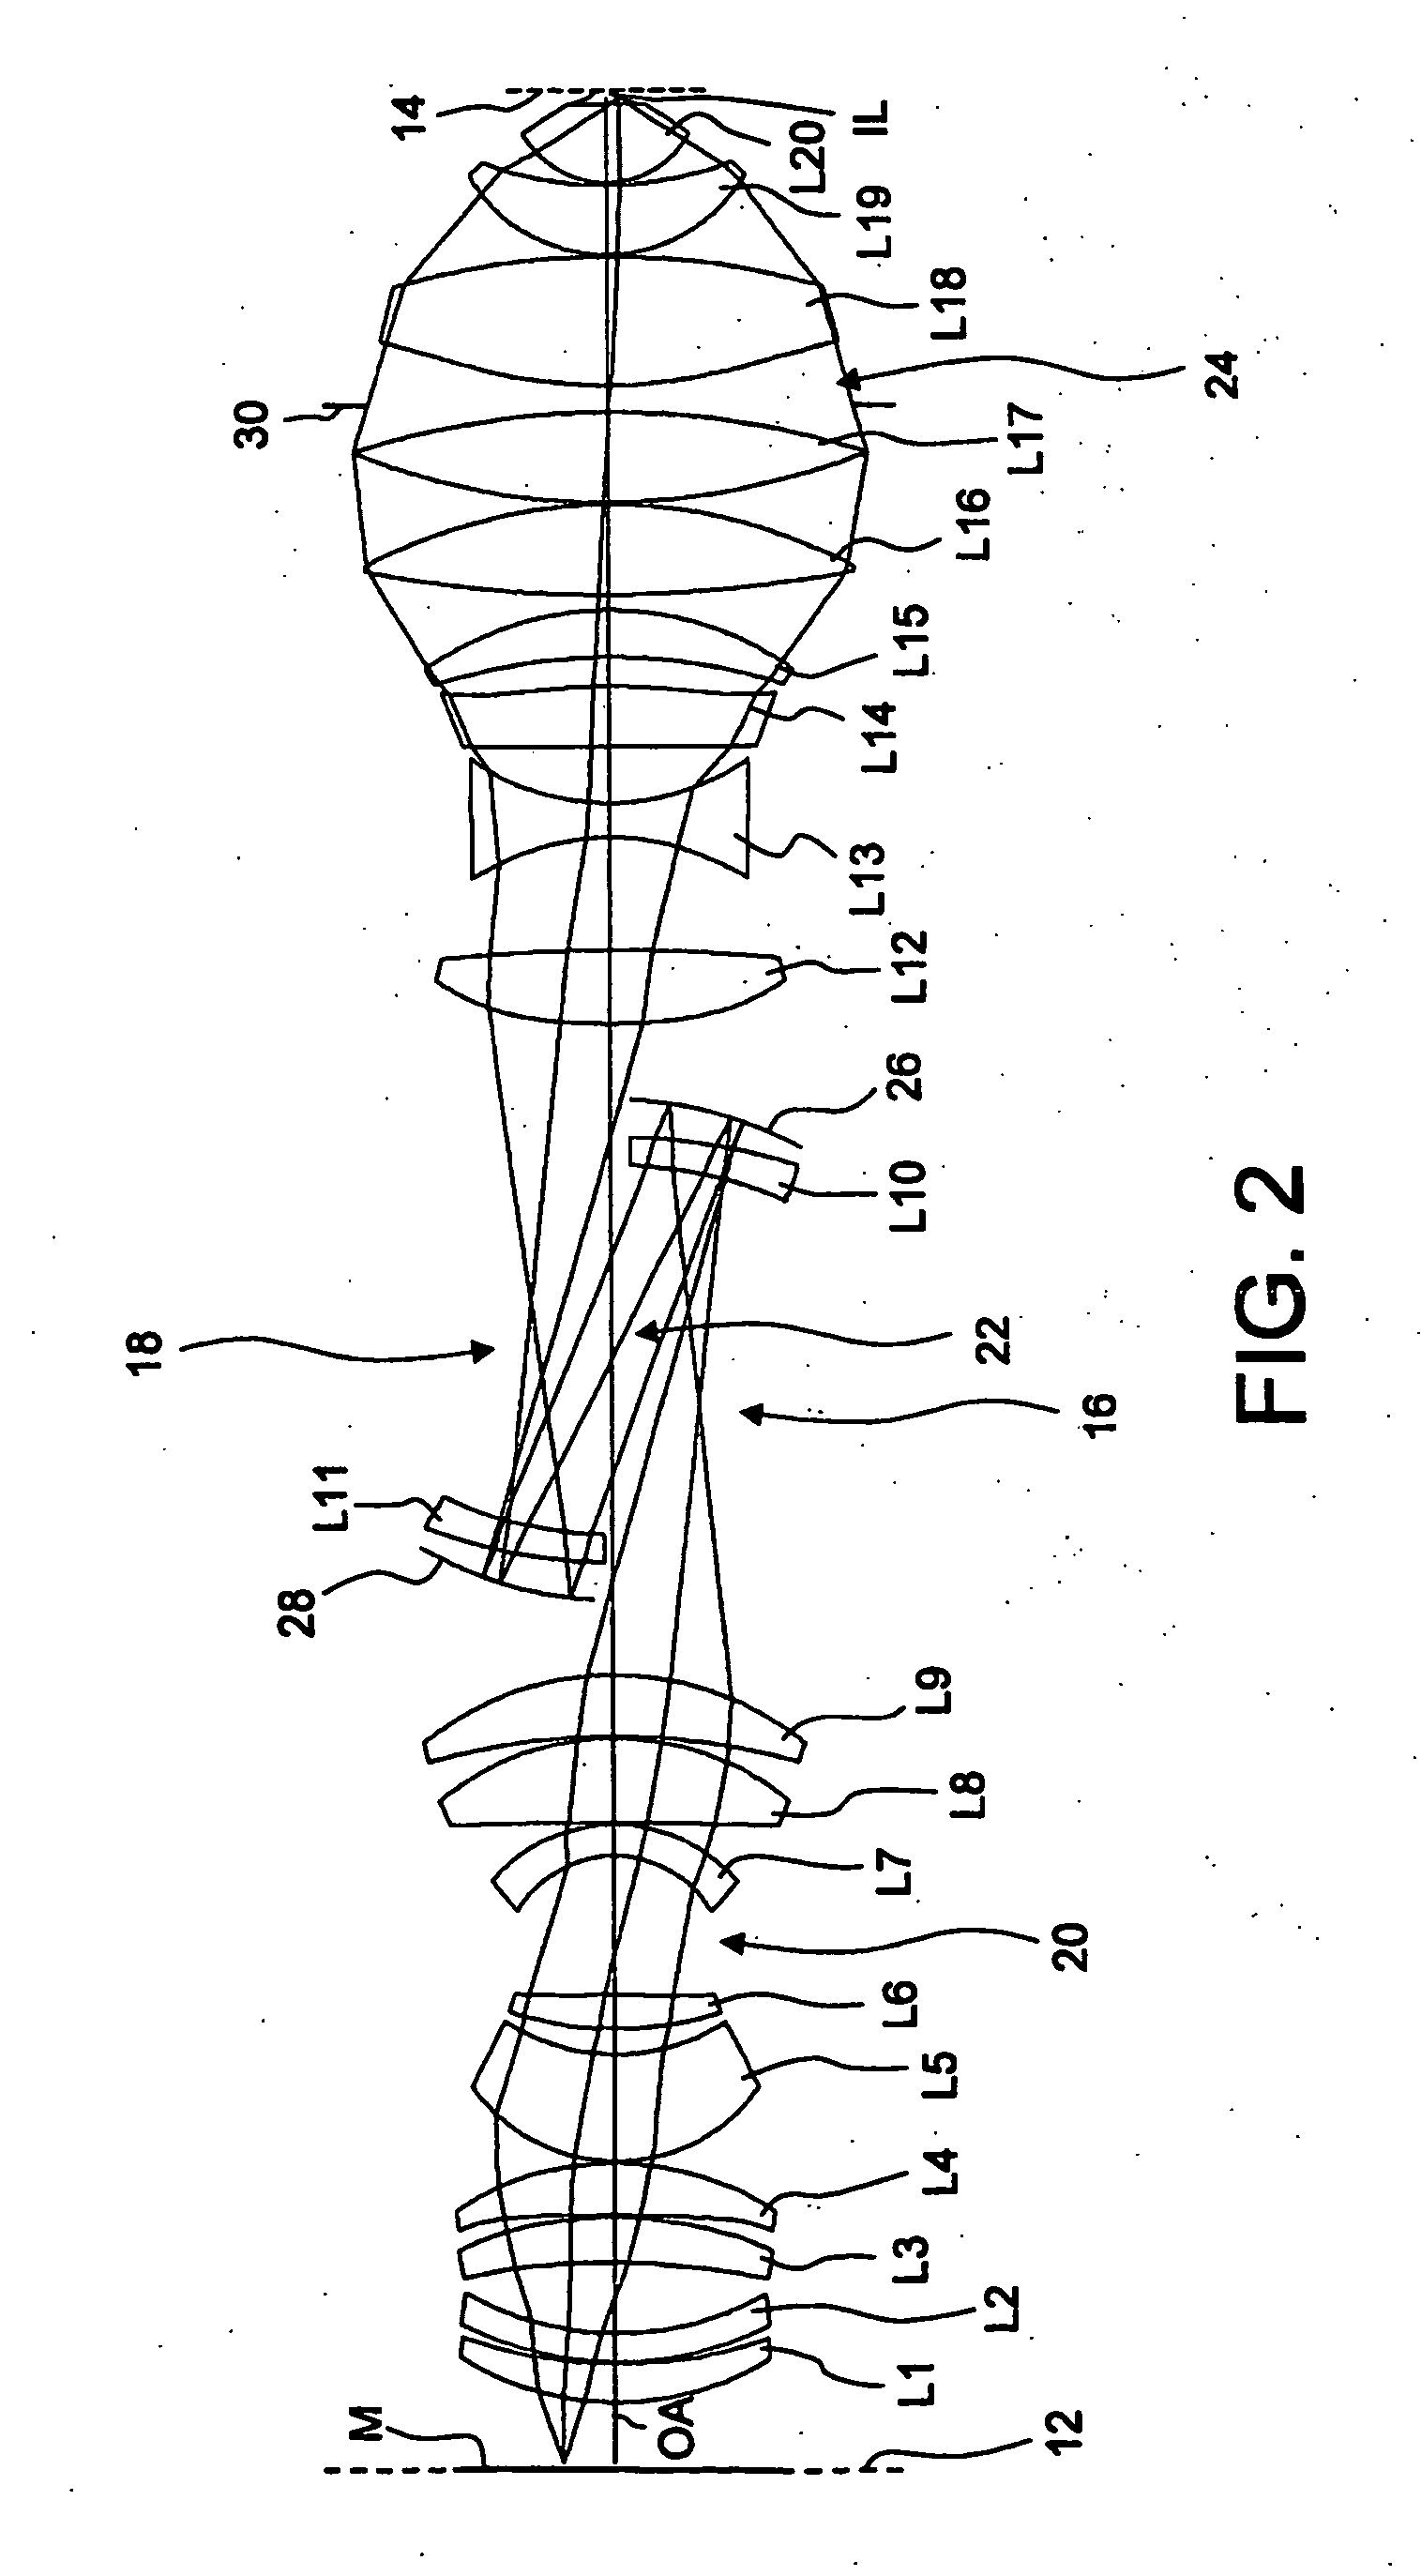 Method of determining lens materials for a projection exposure apparatus